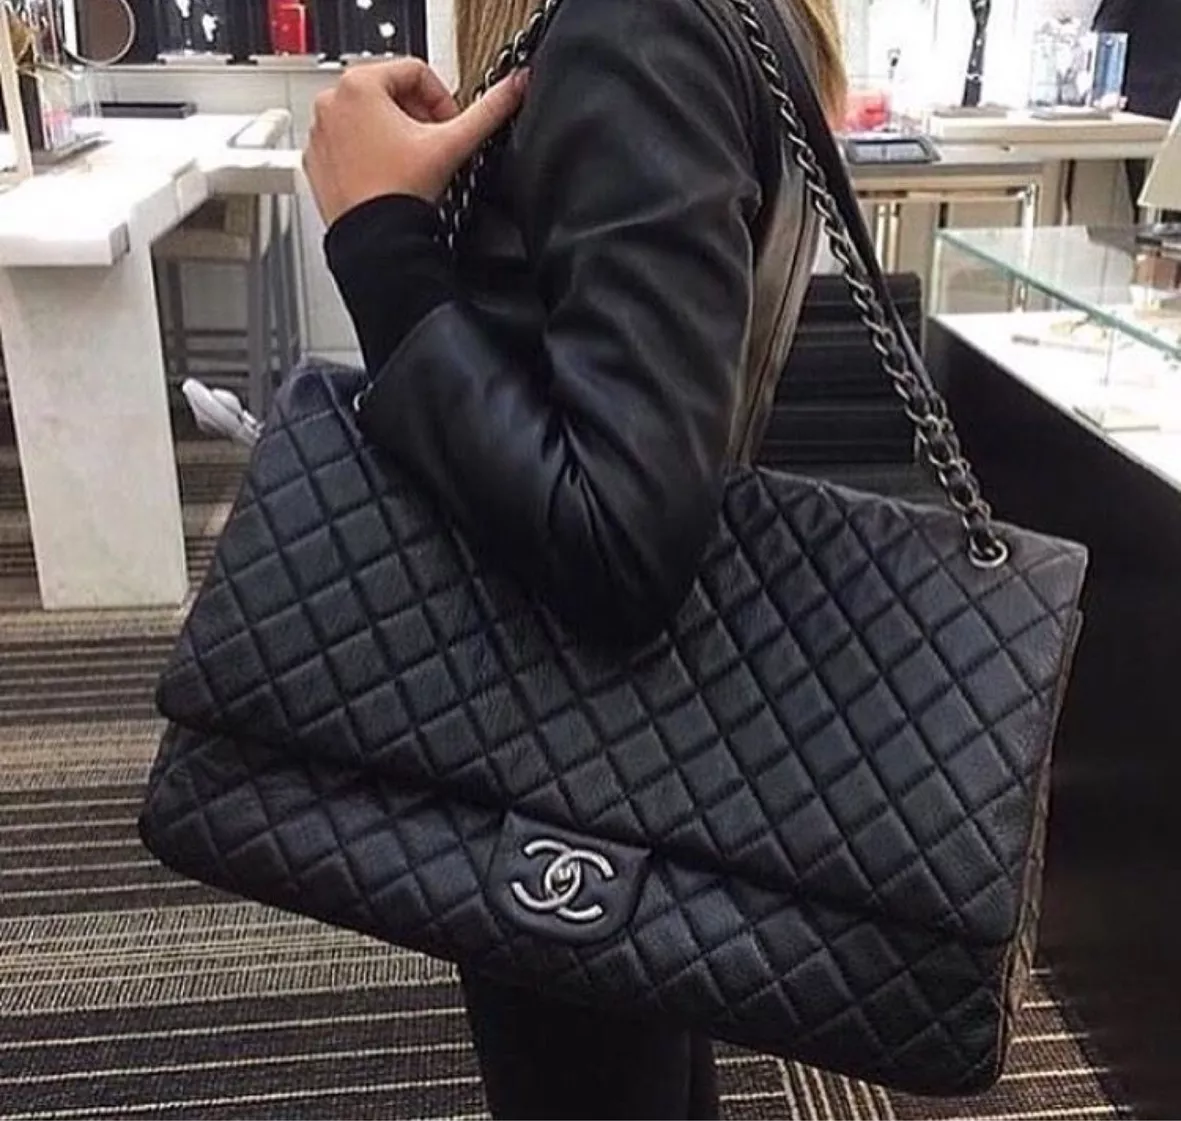 Chanel Classic Flap Bag DUPES #chanel #luxury #bags #fashion